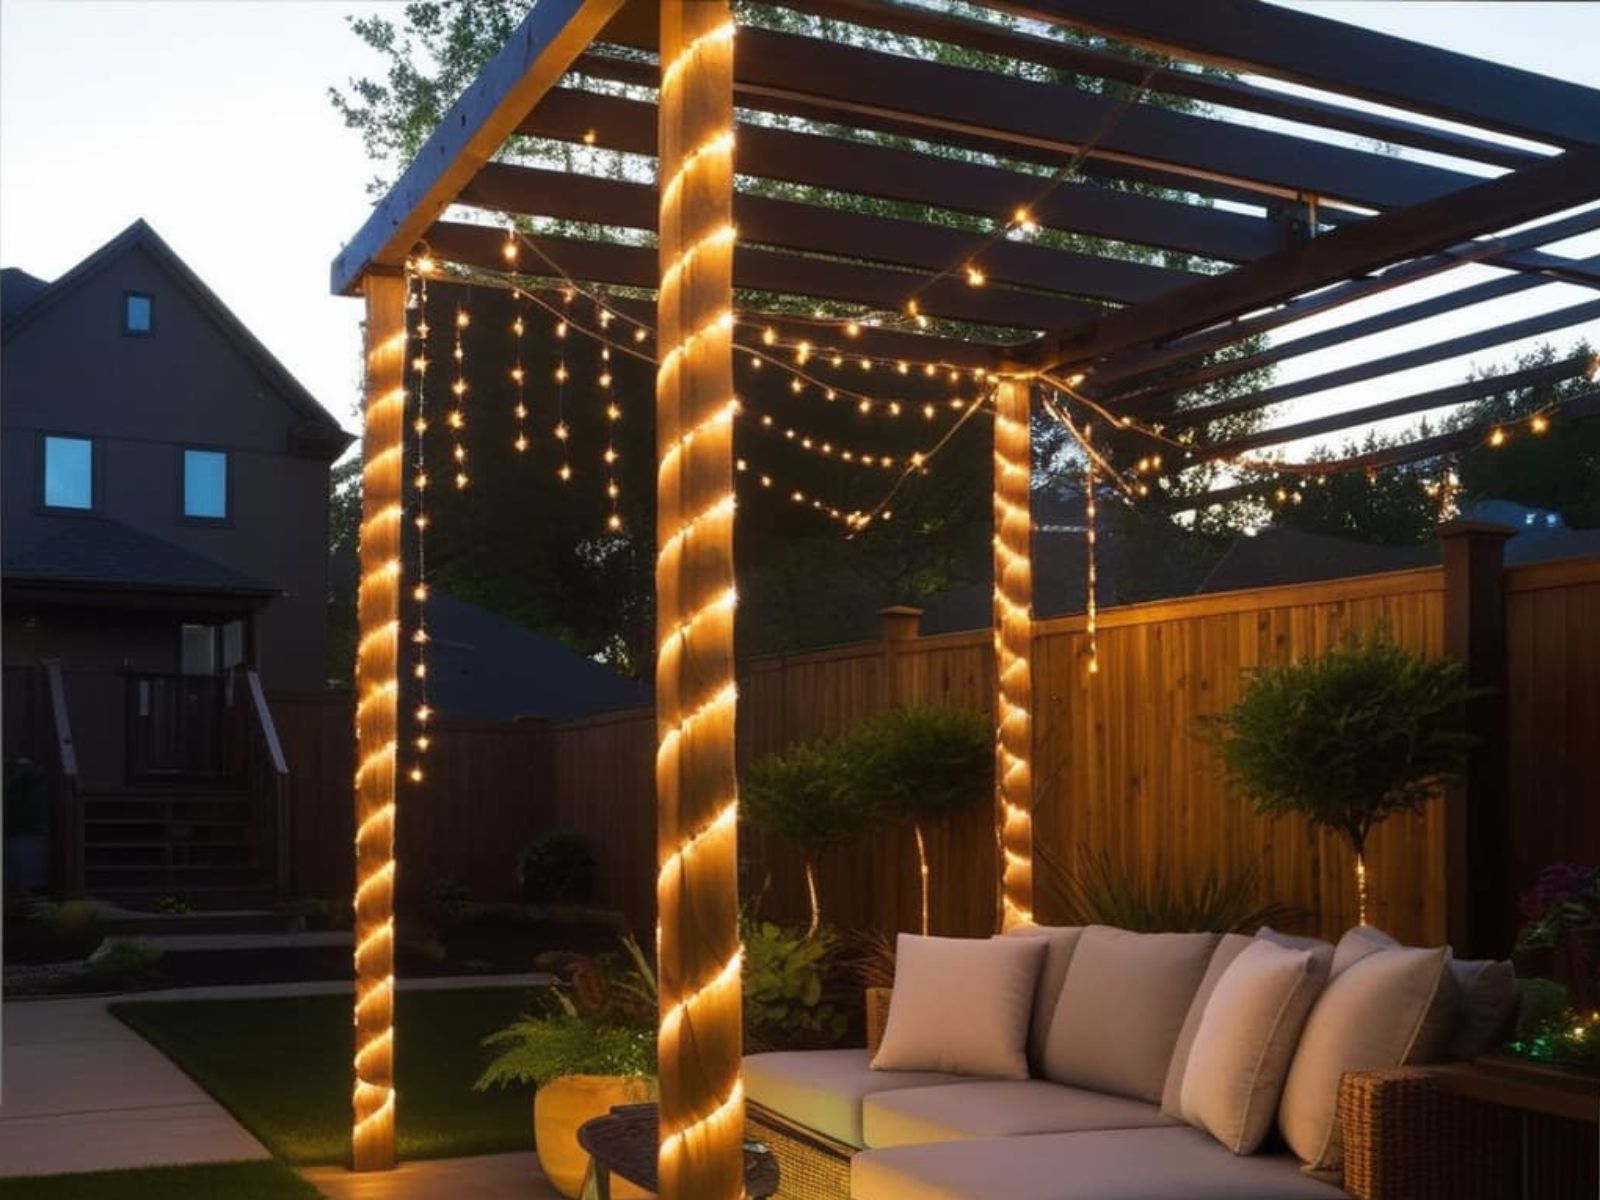 Rope lights wrapped around pillars of a pergola for landscaping